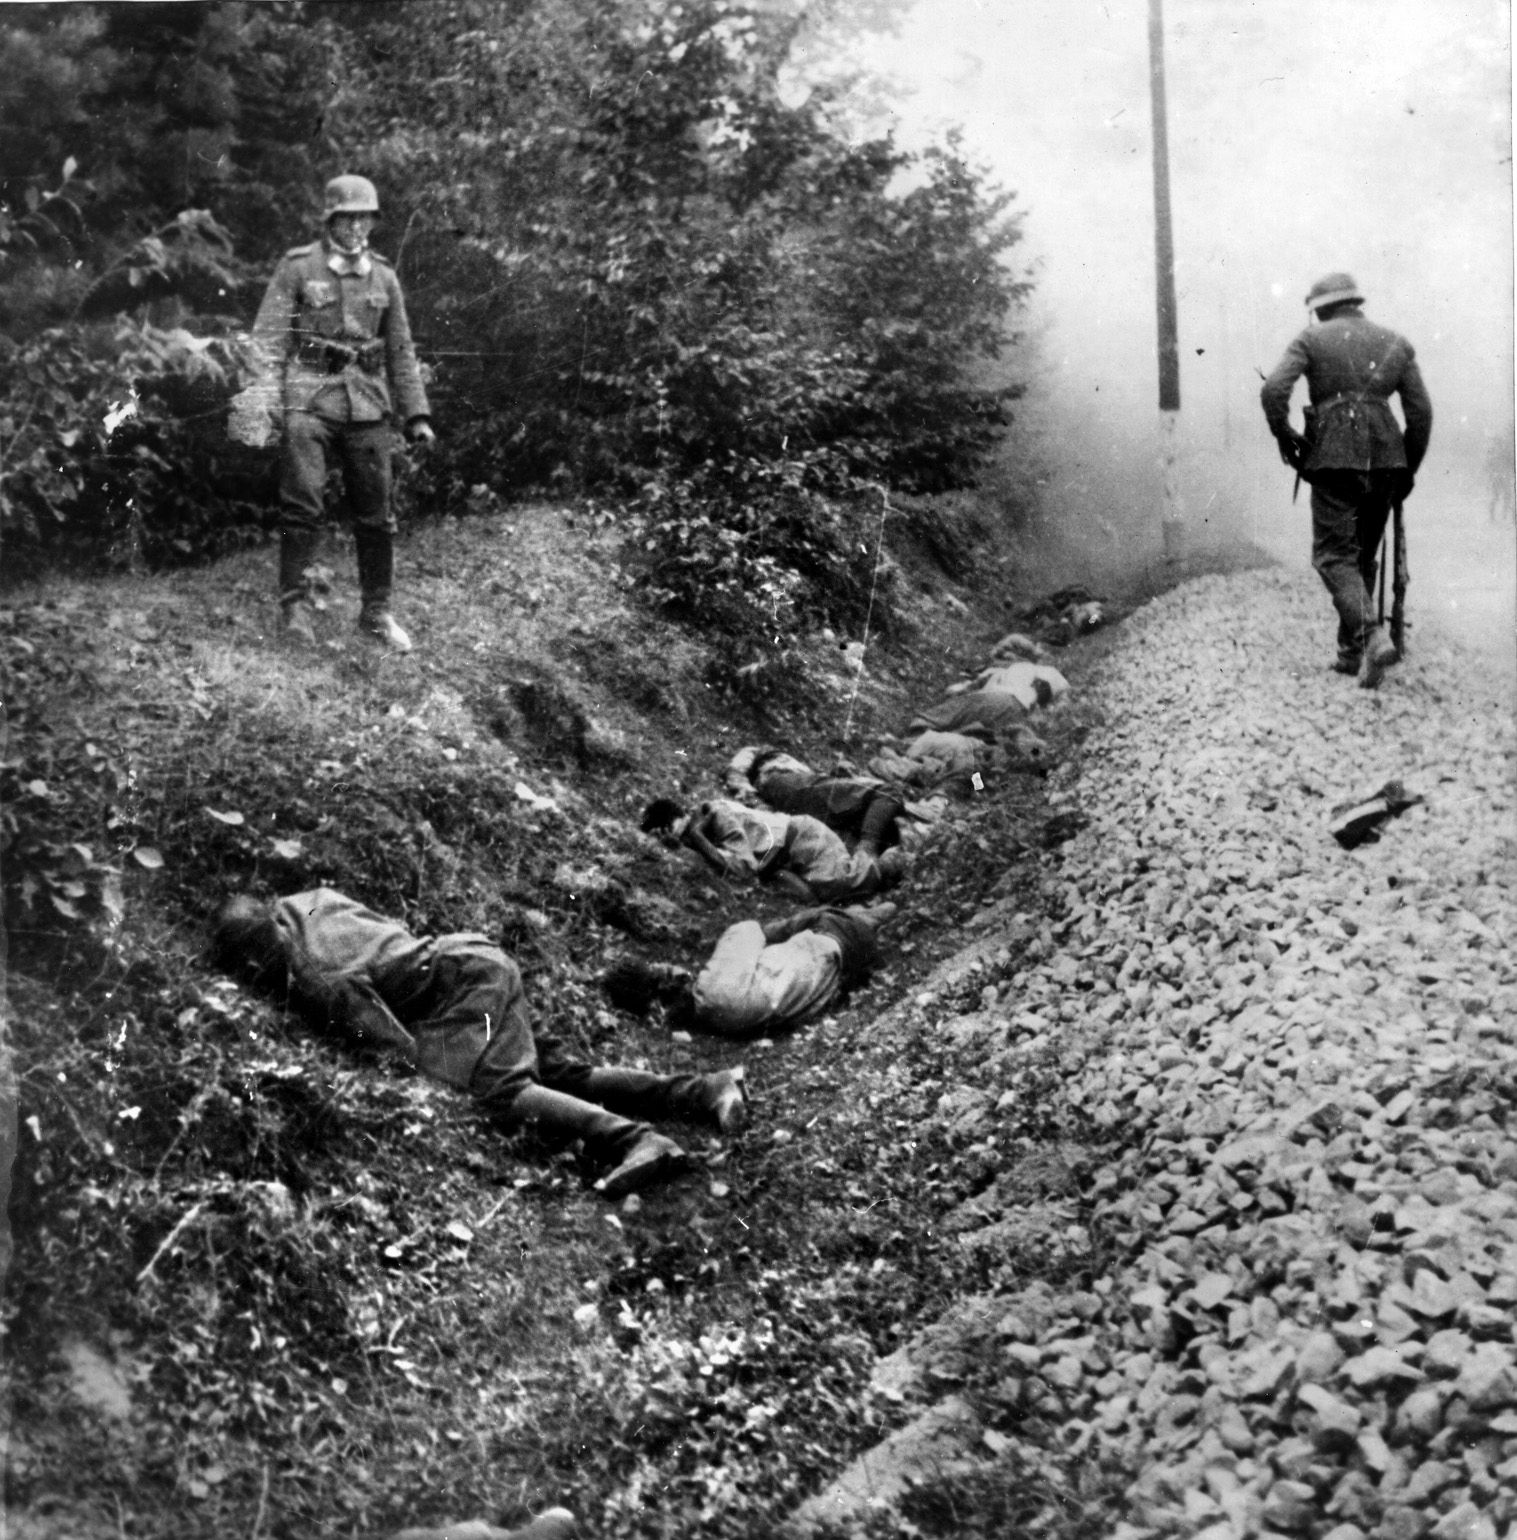 German soldiers gaze at the corpses of Polish soldiers littering a ditch alongside a country road, executed after their surrender. The Germans and the Red Army engaged in atrocities against the Polish military and civilian population as well.